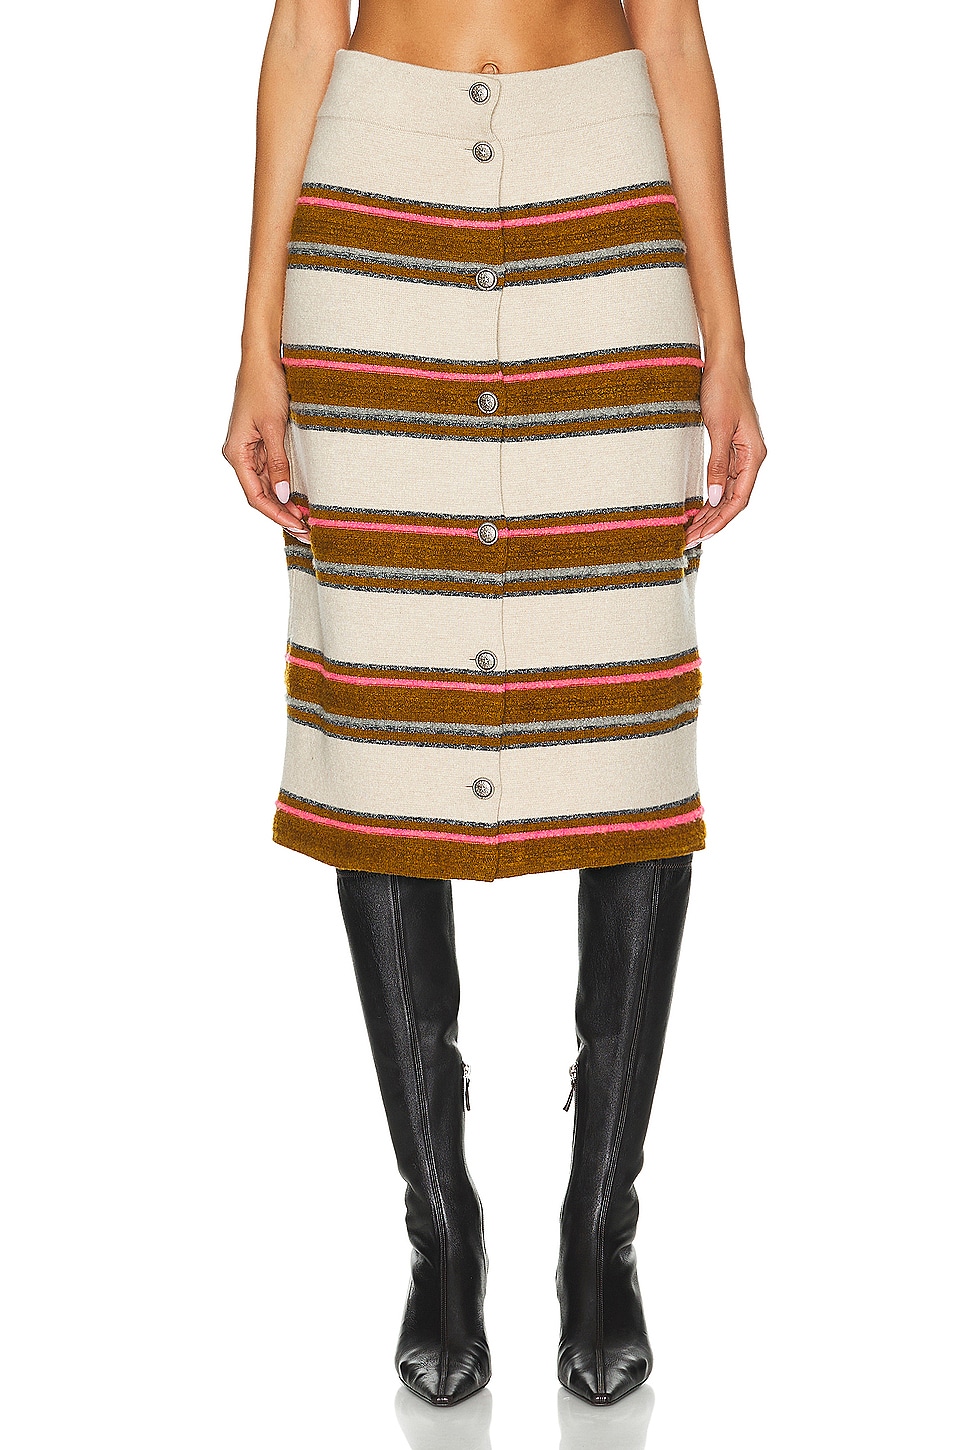 Image 1 of FWRD Renew Chanel Striped Knit Skirt in Beige & Brown